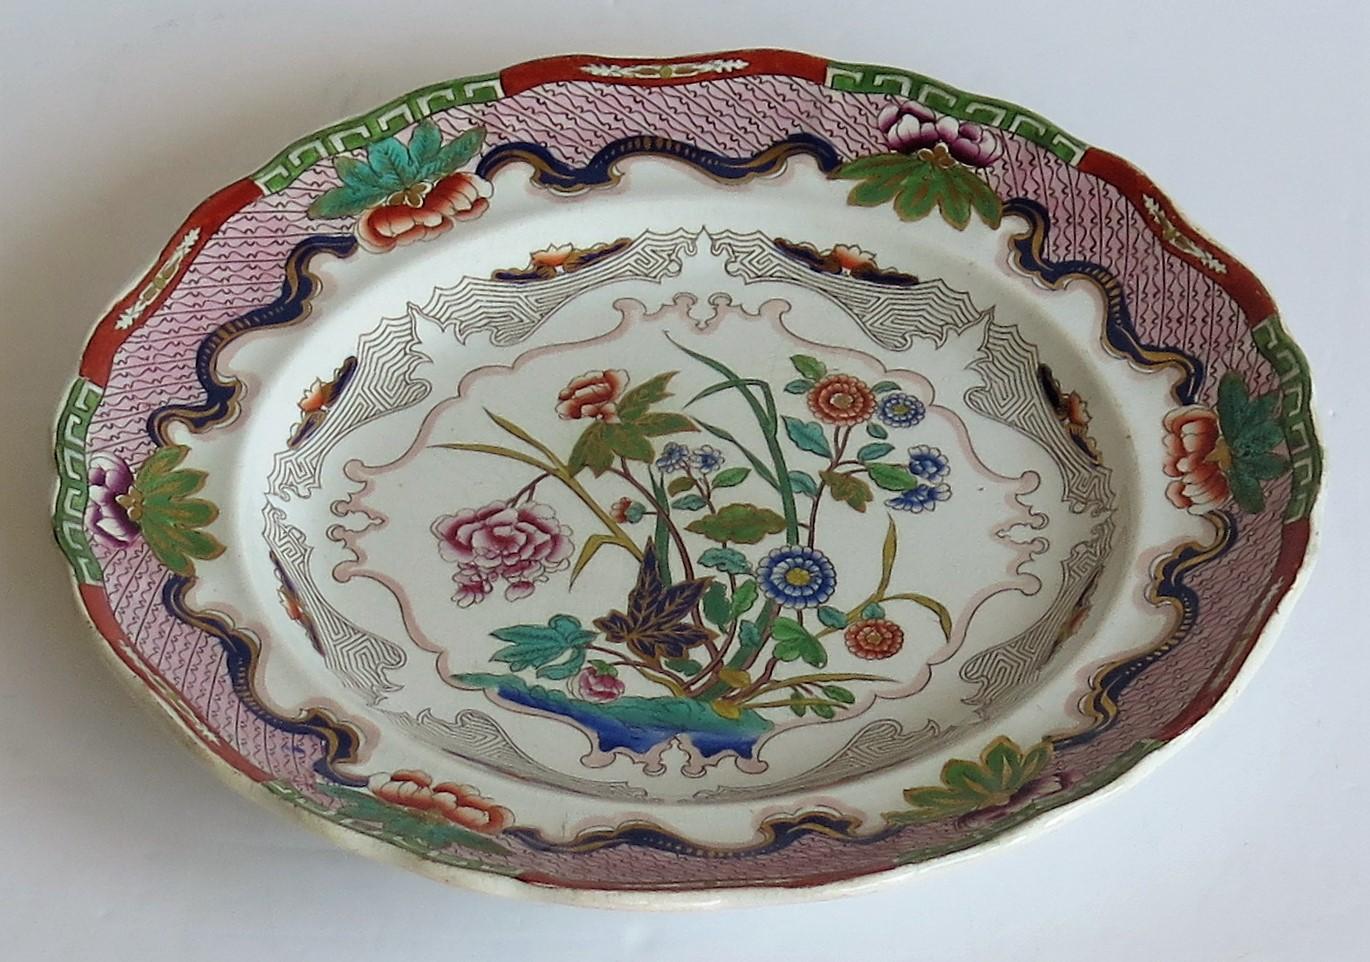 Charles Meigh Ironstone Plate Hand Painted Floral Pattern No. 422, circa 1840 2